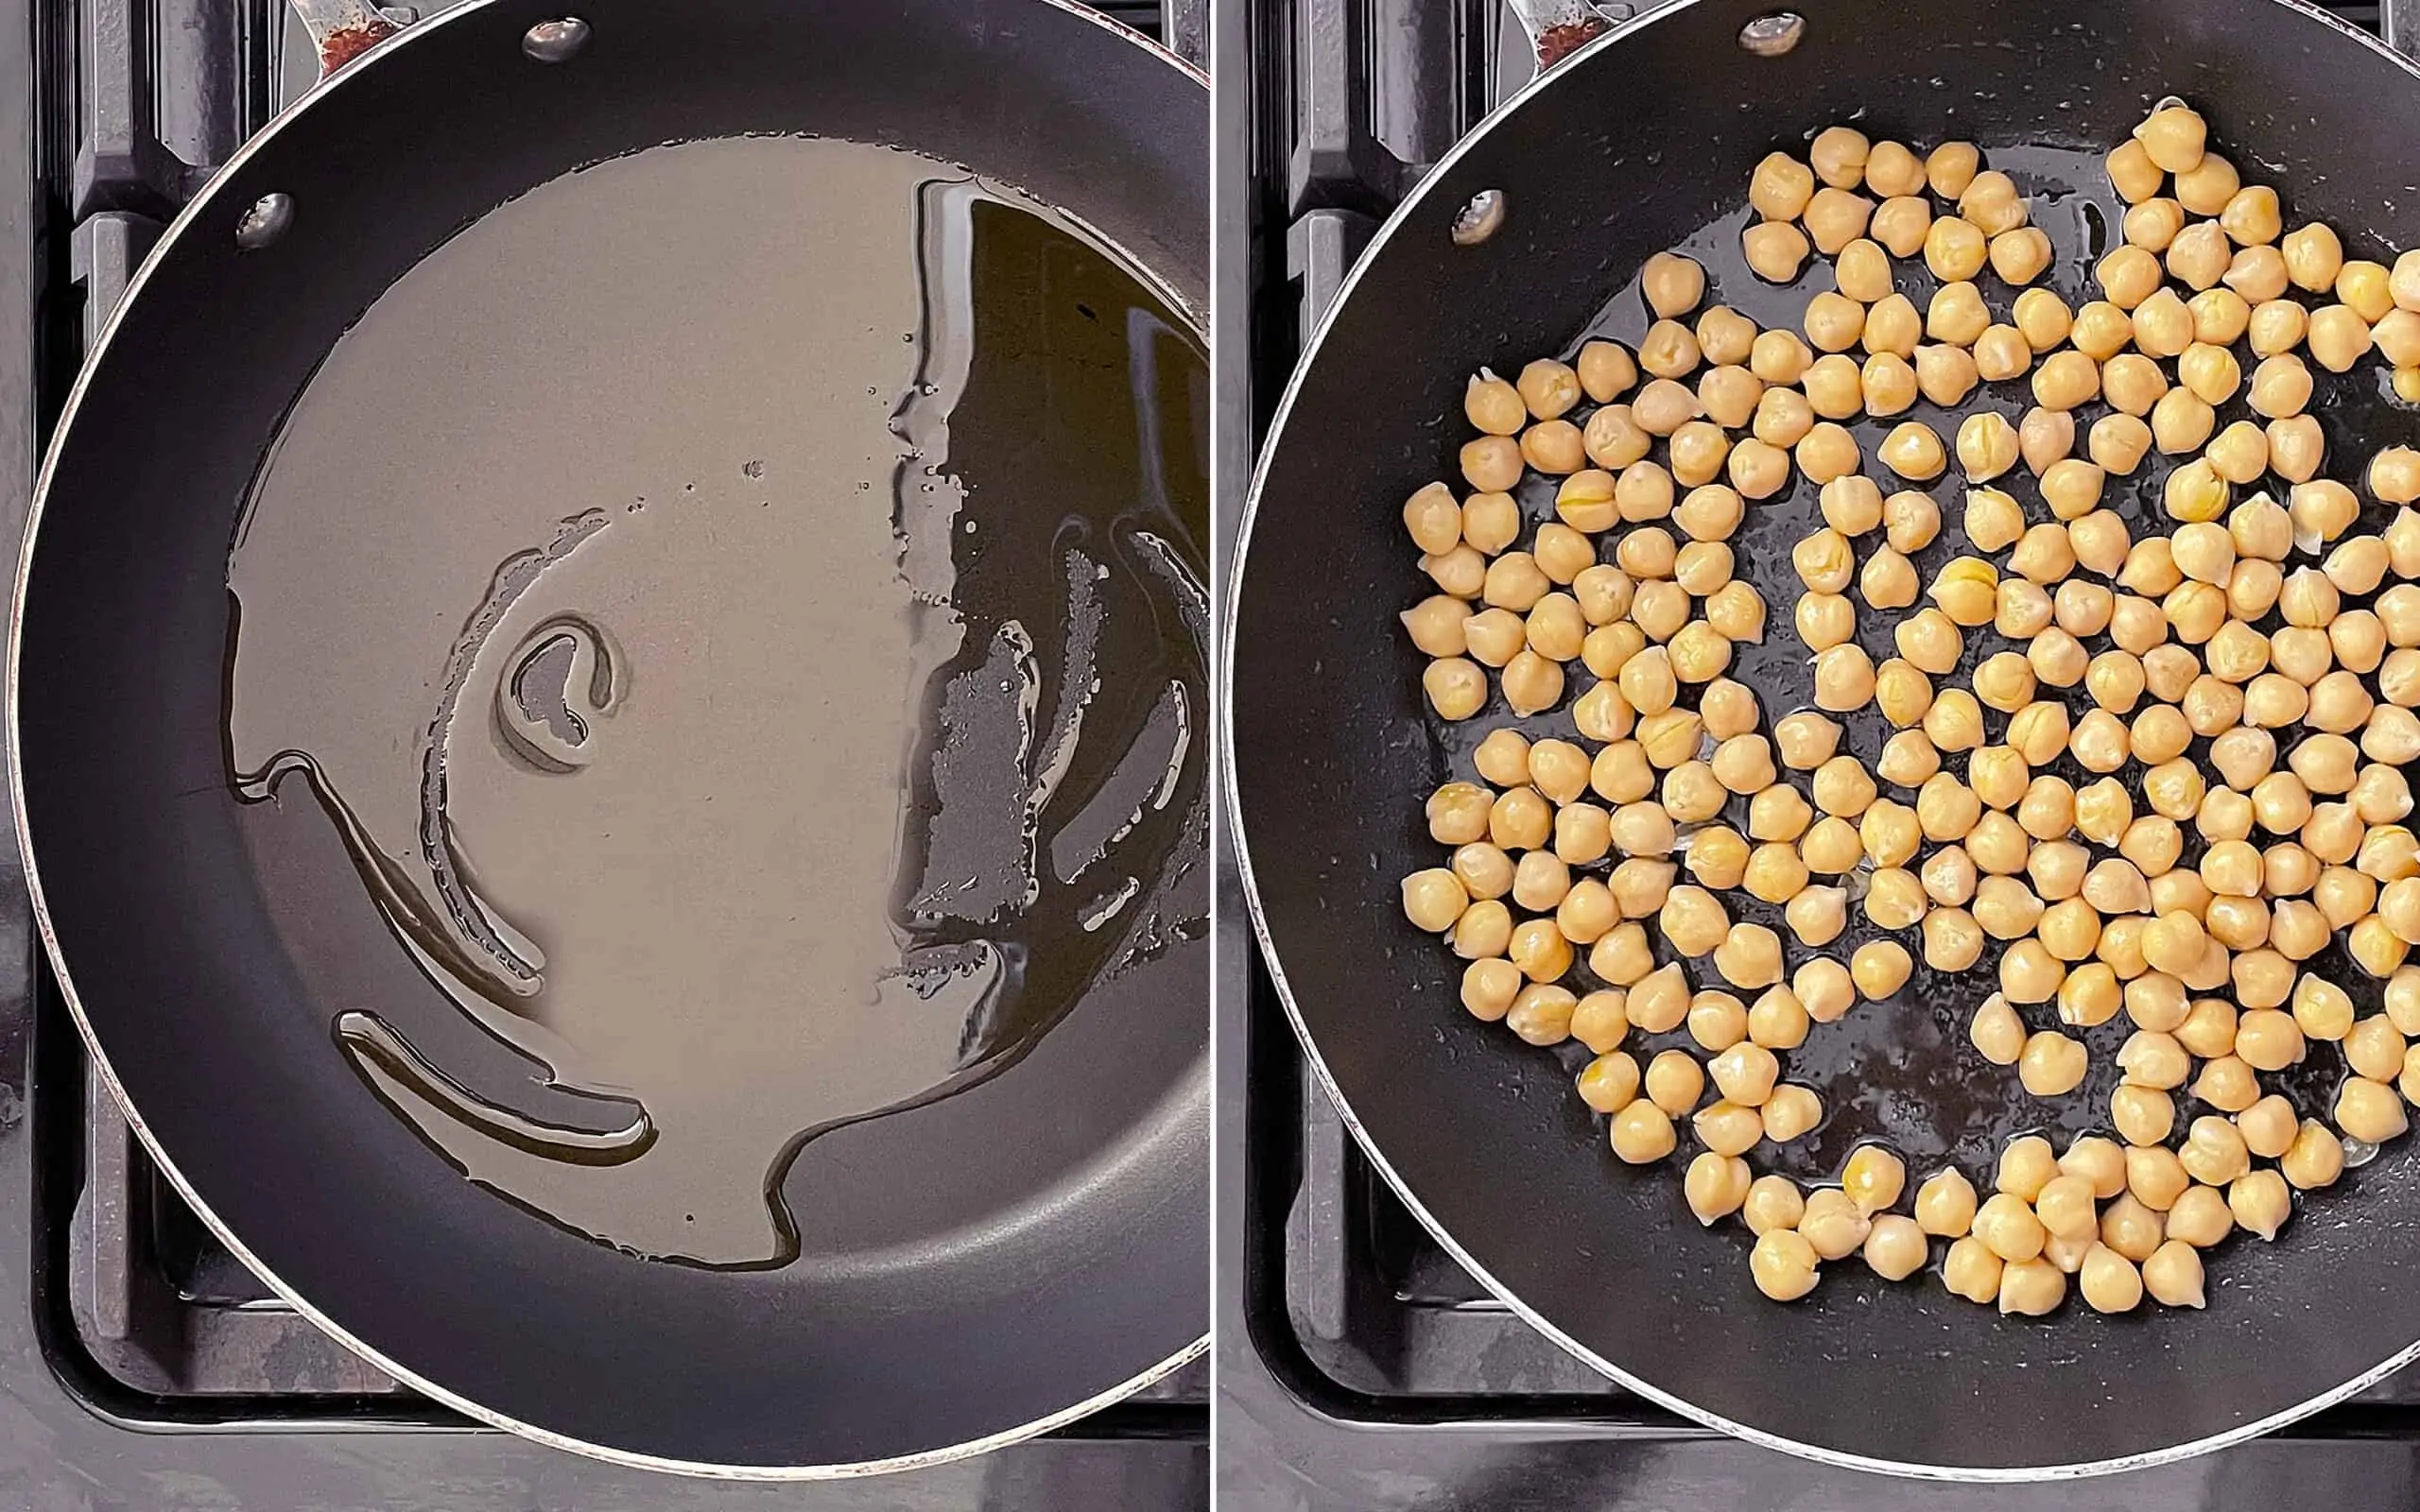 Heat the olive oil in a skillet on the stove. Add the chickpeas.